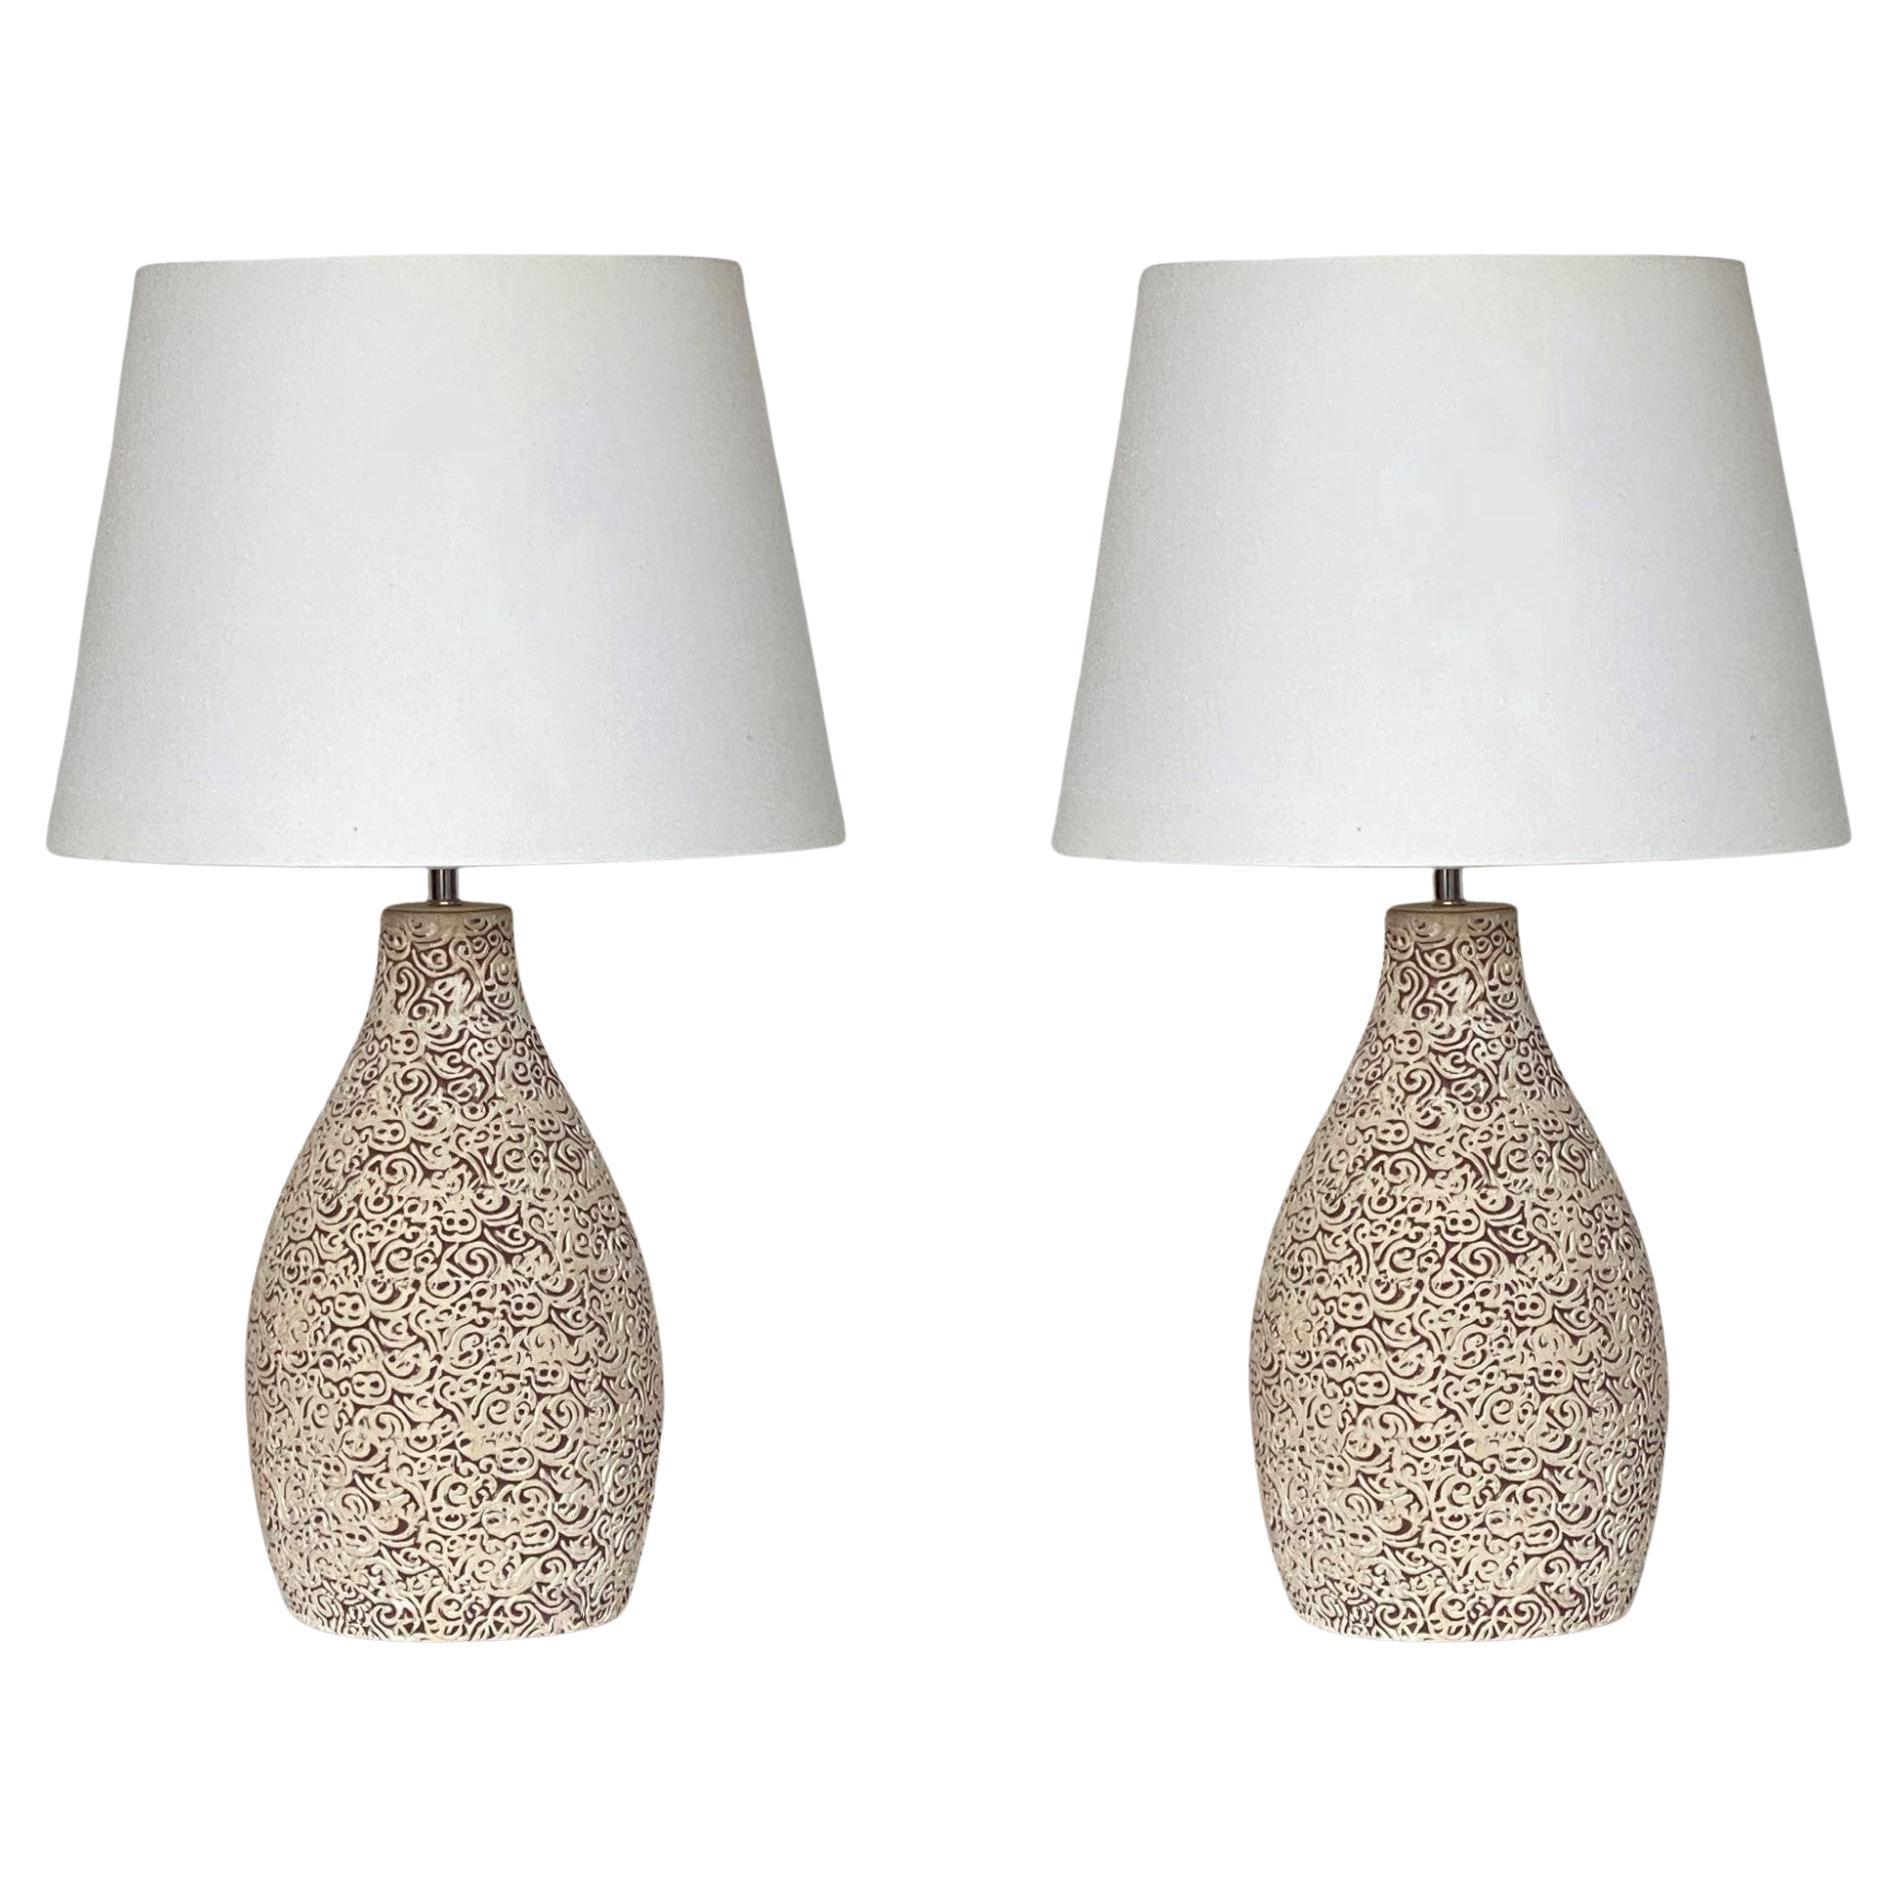 Pair of French Hand-Crafted Ceramic Table Lamps, 1960s